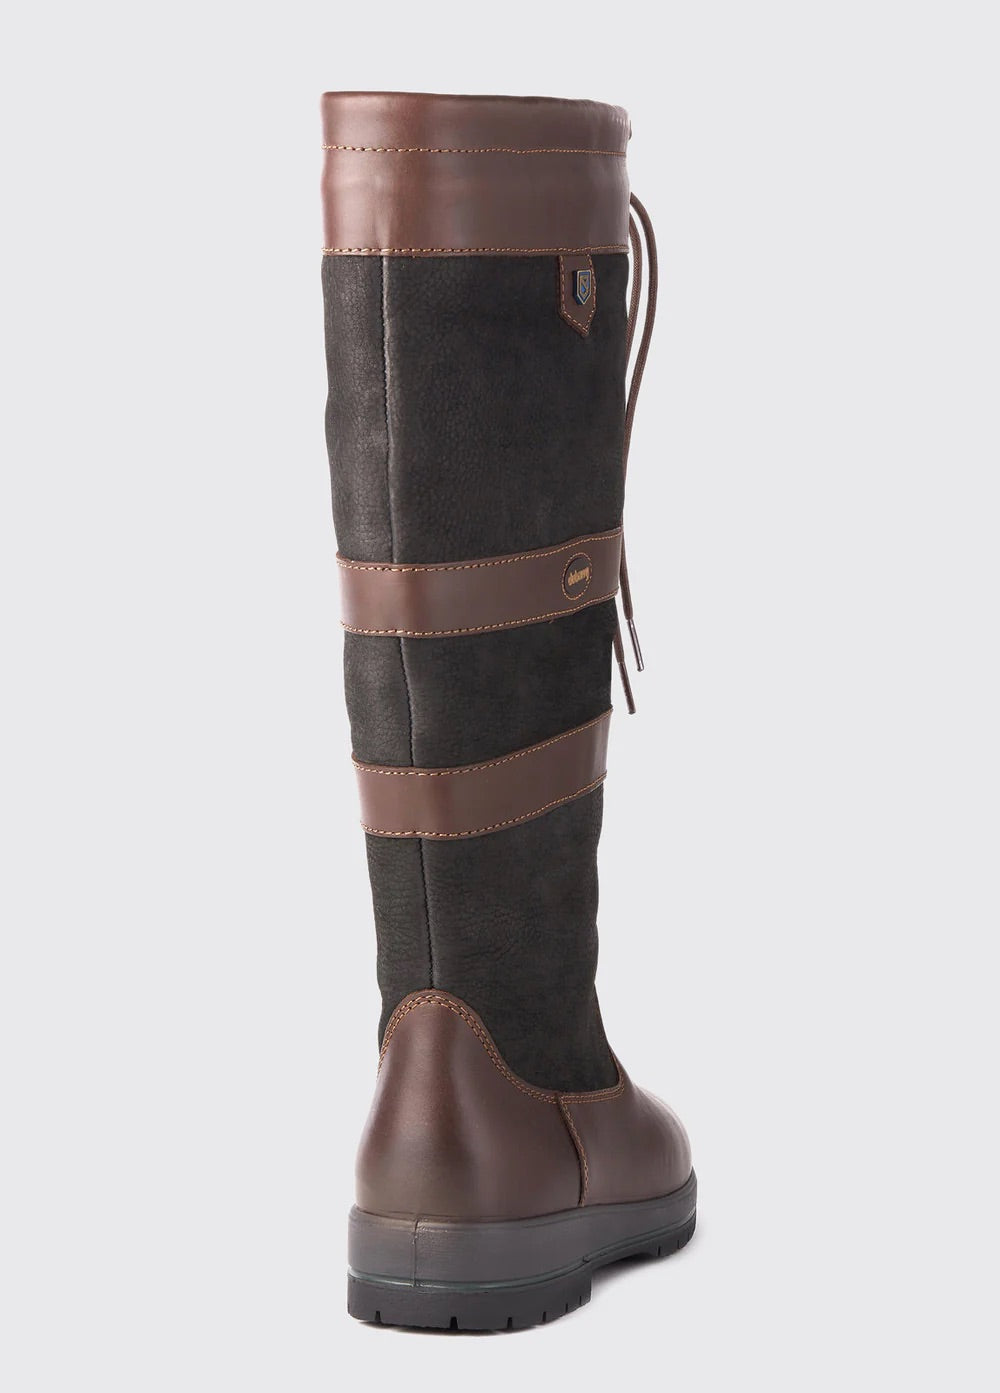 DUBARRY GALWAY BOOT